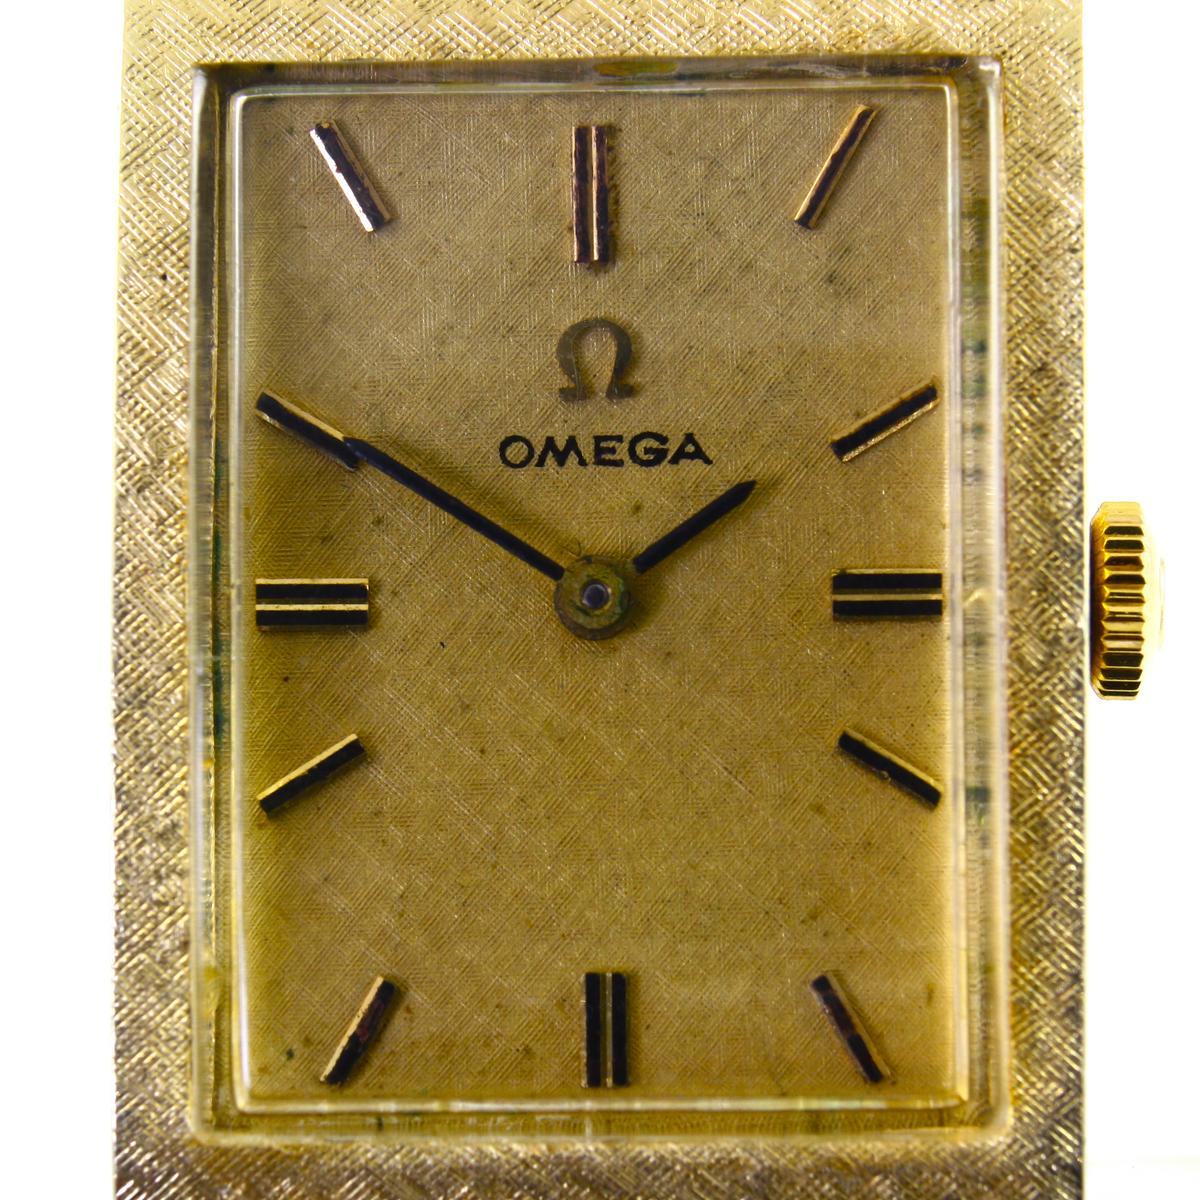 Authentic vintage Omega 14K yellow gold wristwatch